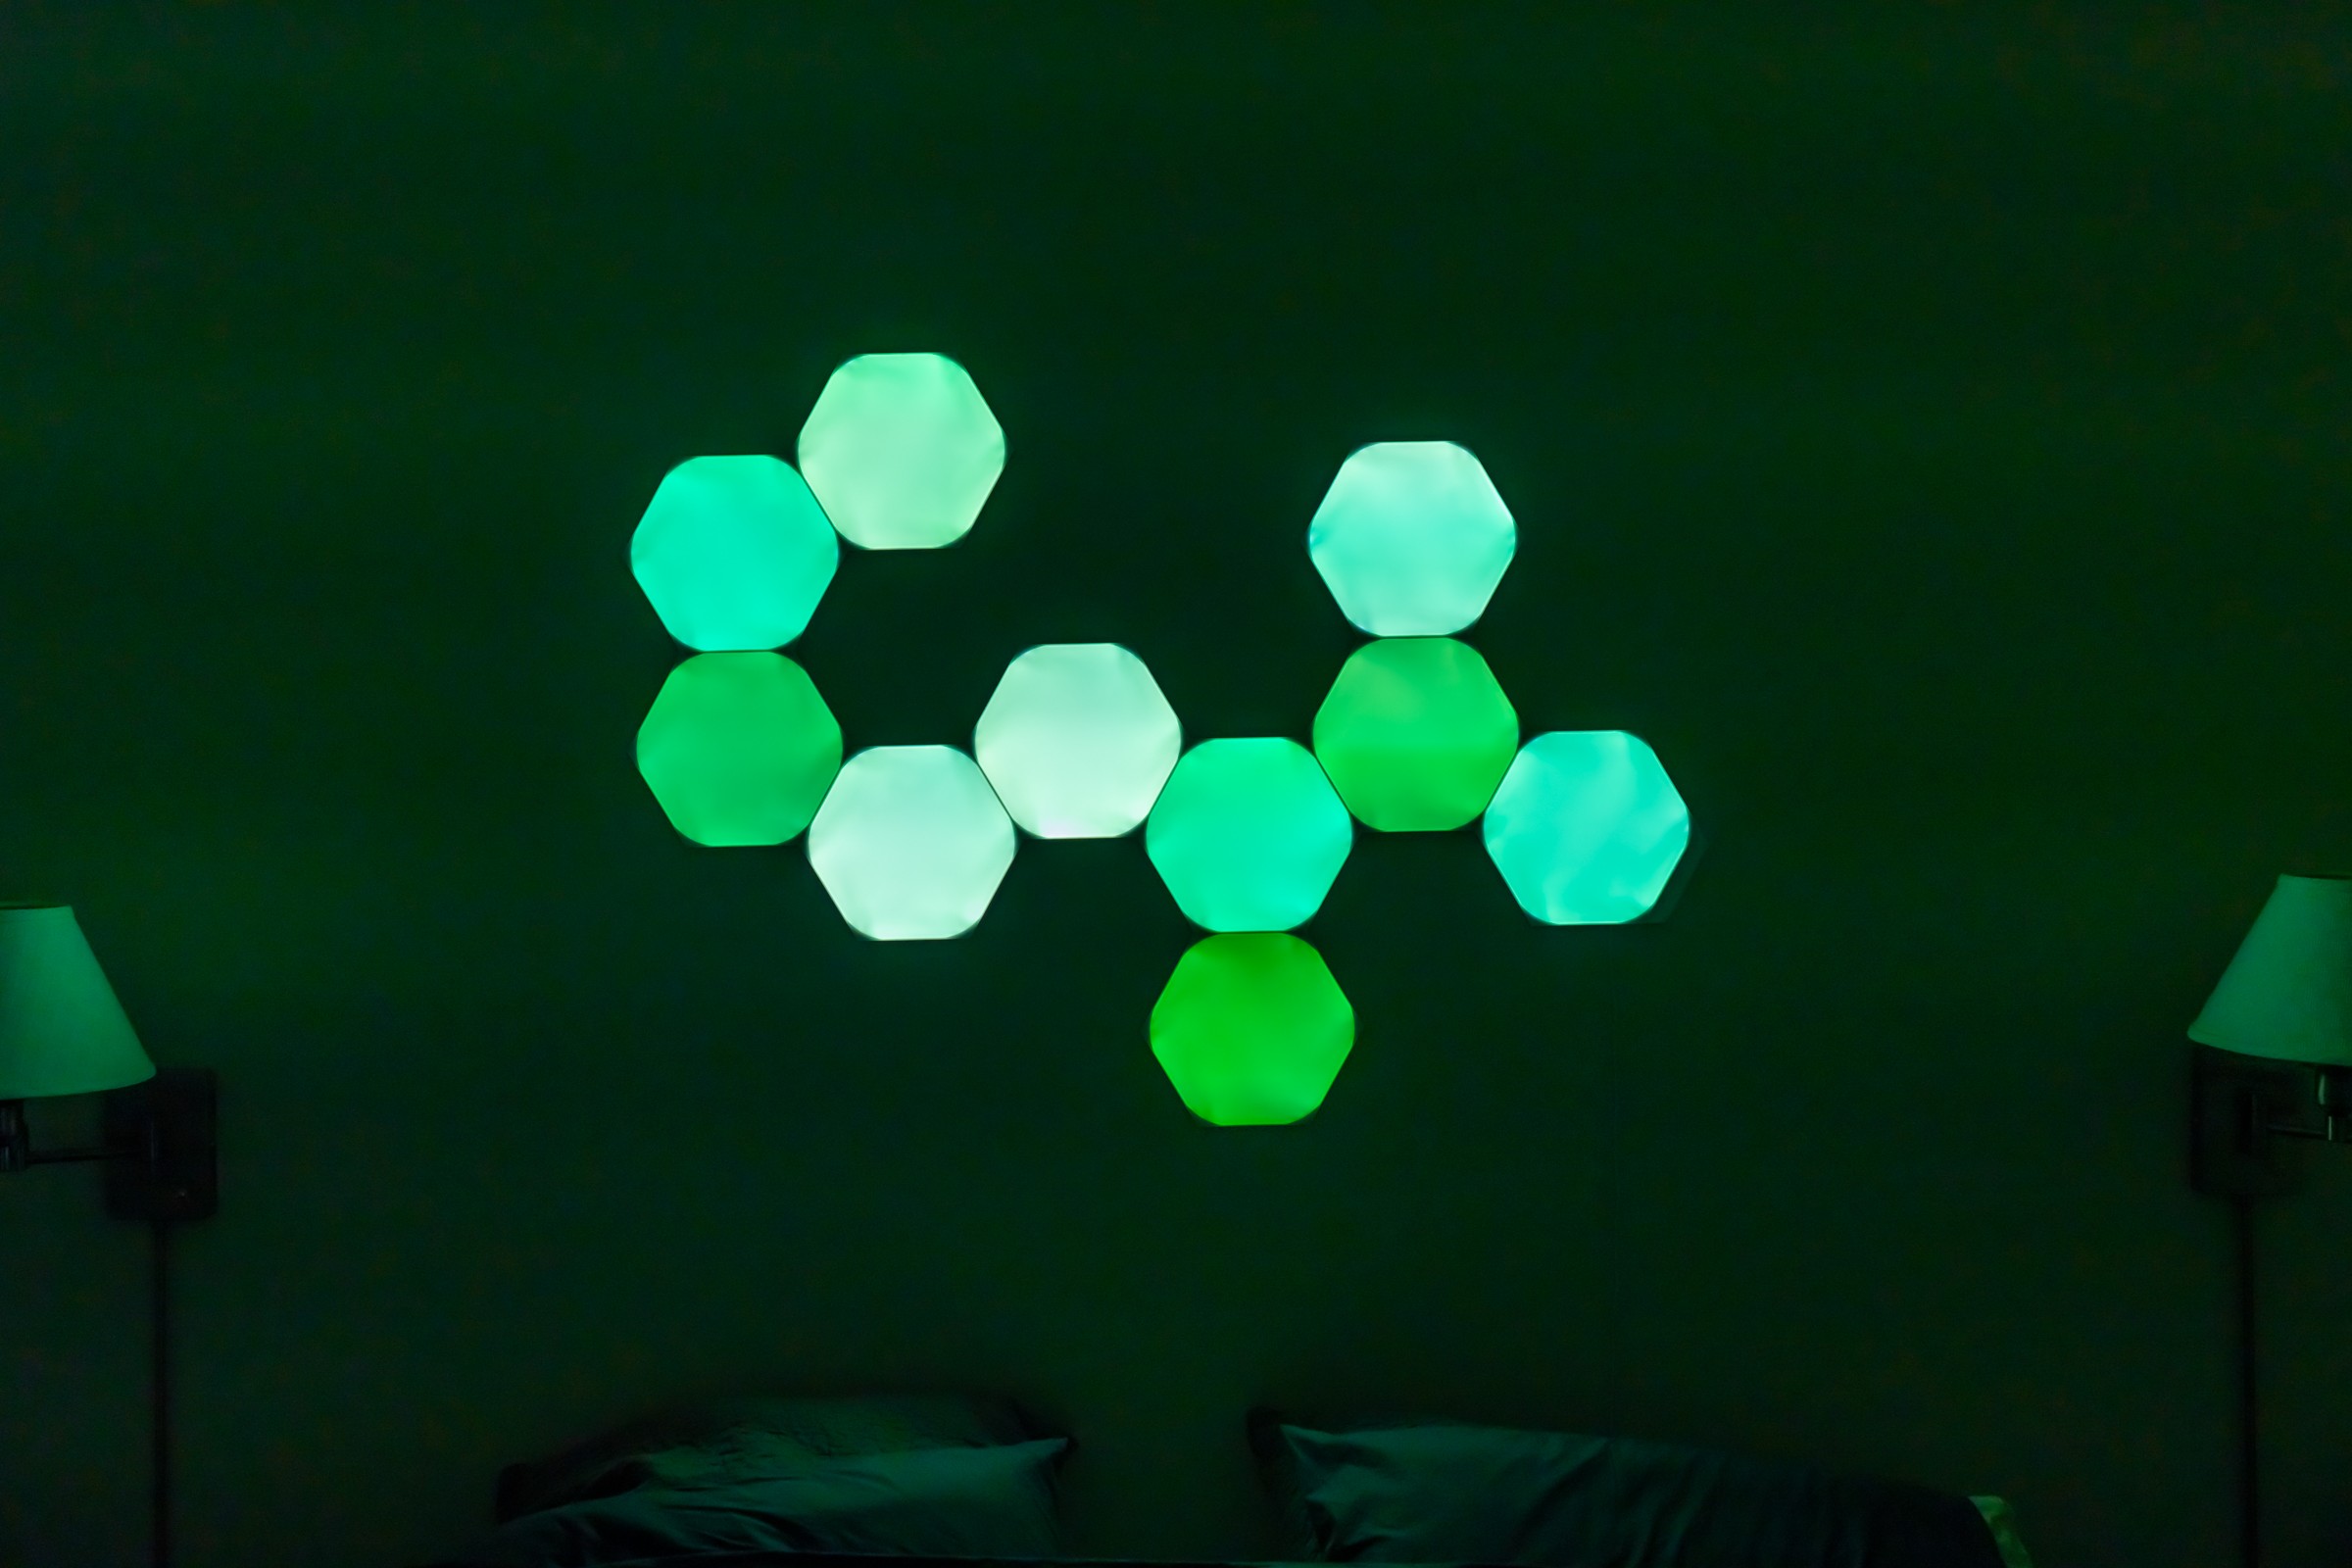 Nanoleaf’s new Hexagon Shapes are a surprisingly lively and organic addition to your home decor